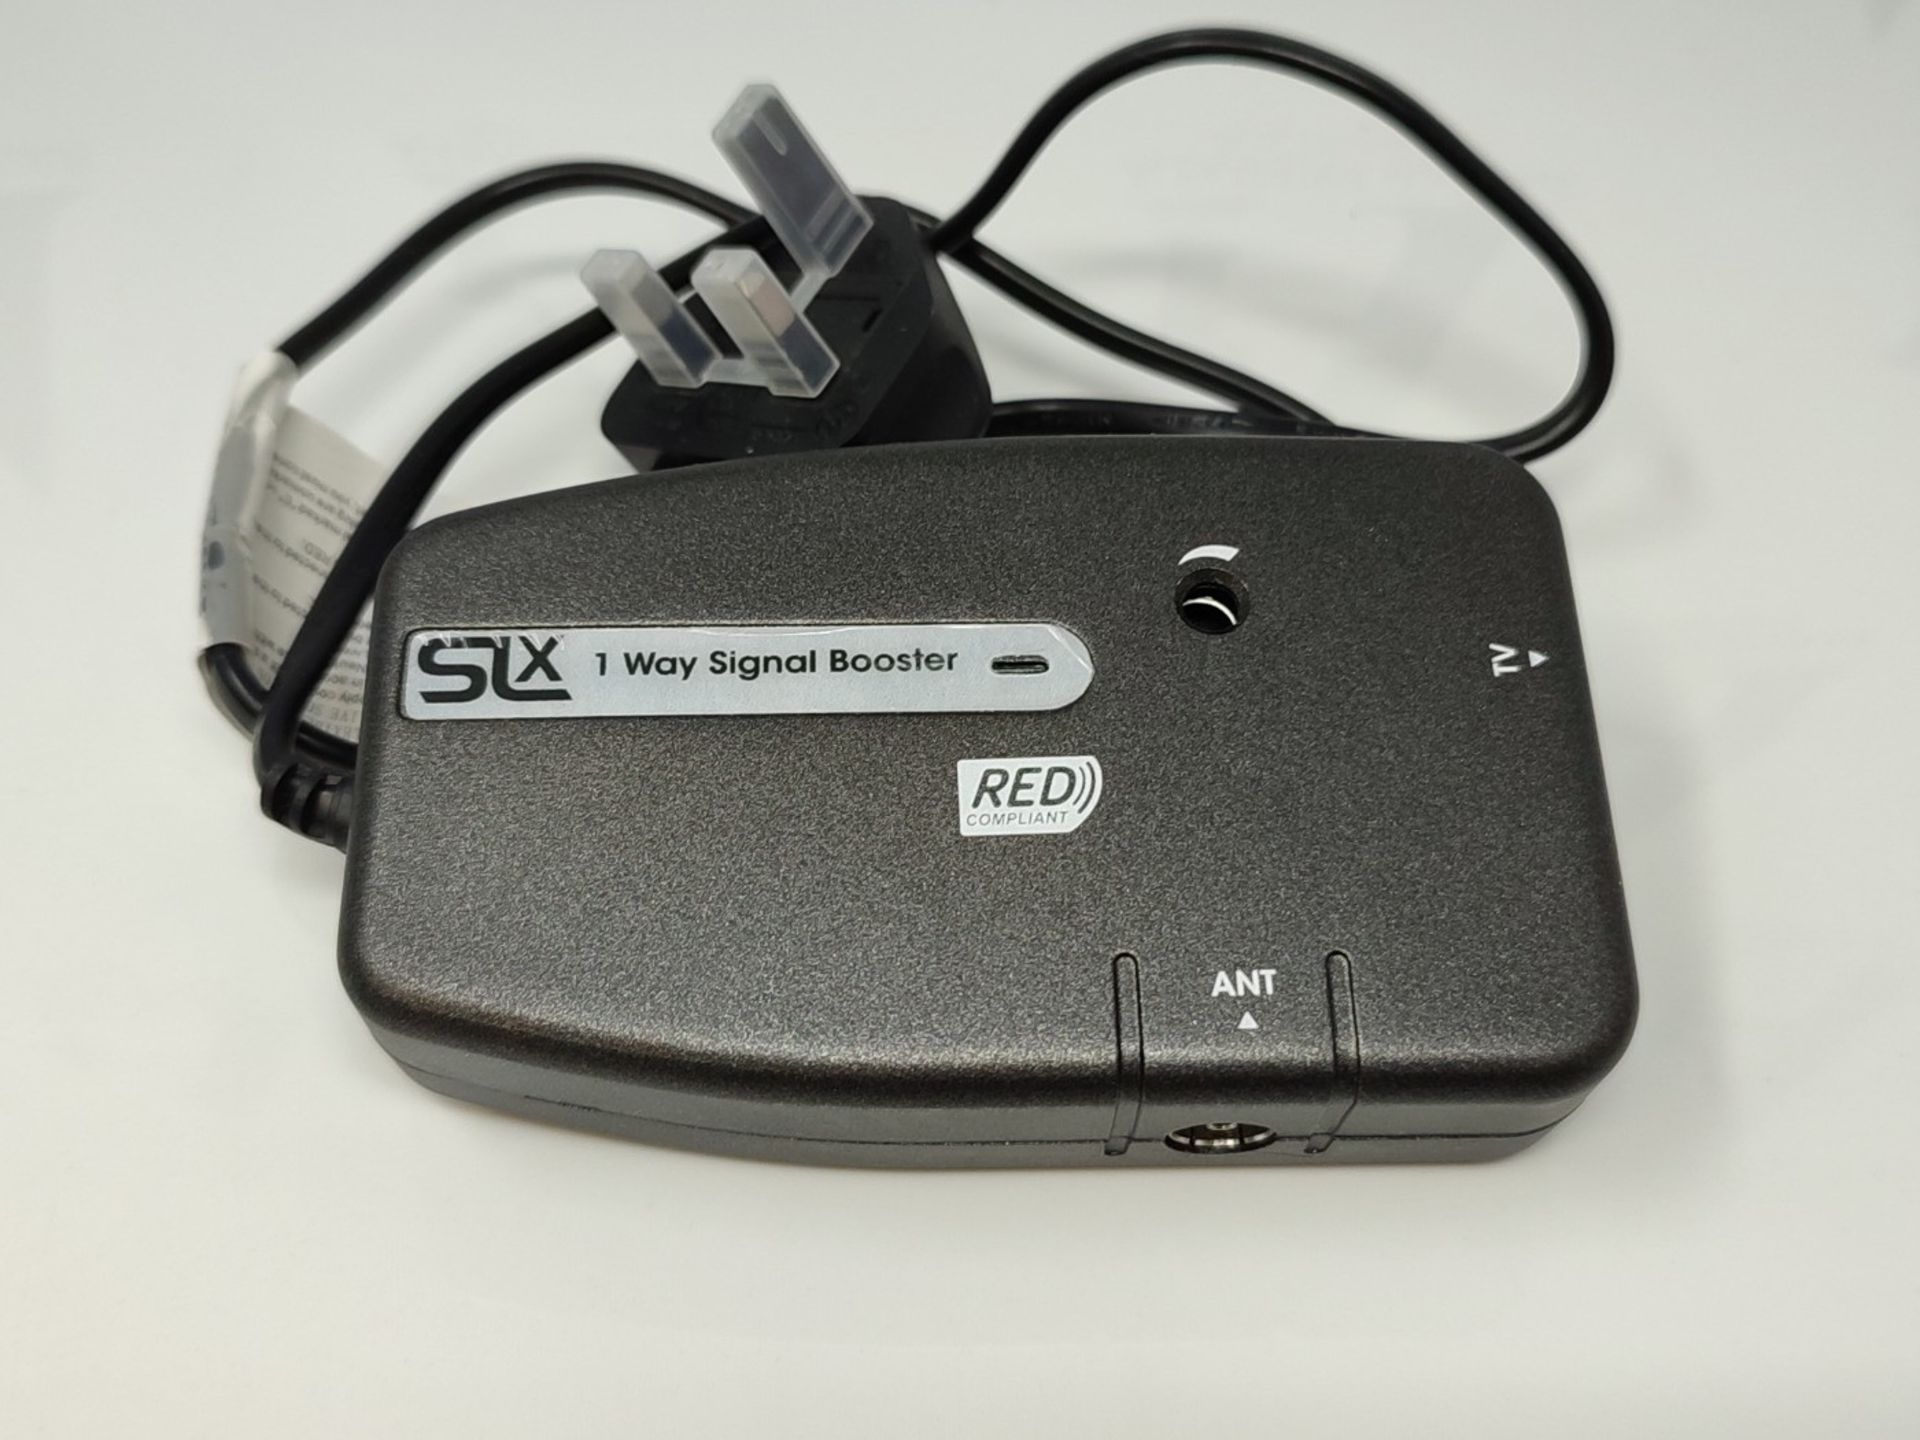 SLx TV Signal Booster Aerial Amplifier, 1Way Signal Distribution Amplifier with Coax C - Image 2 of 2